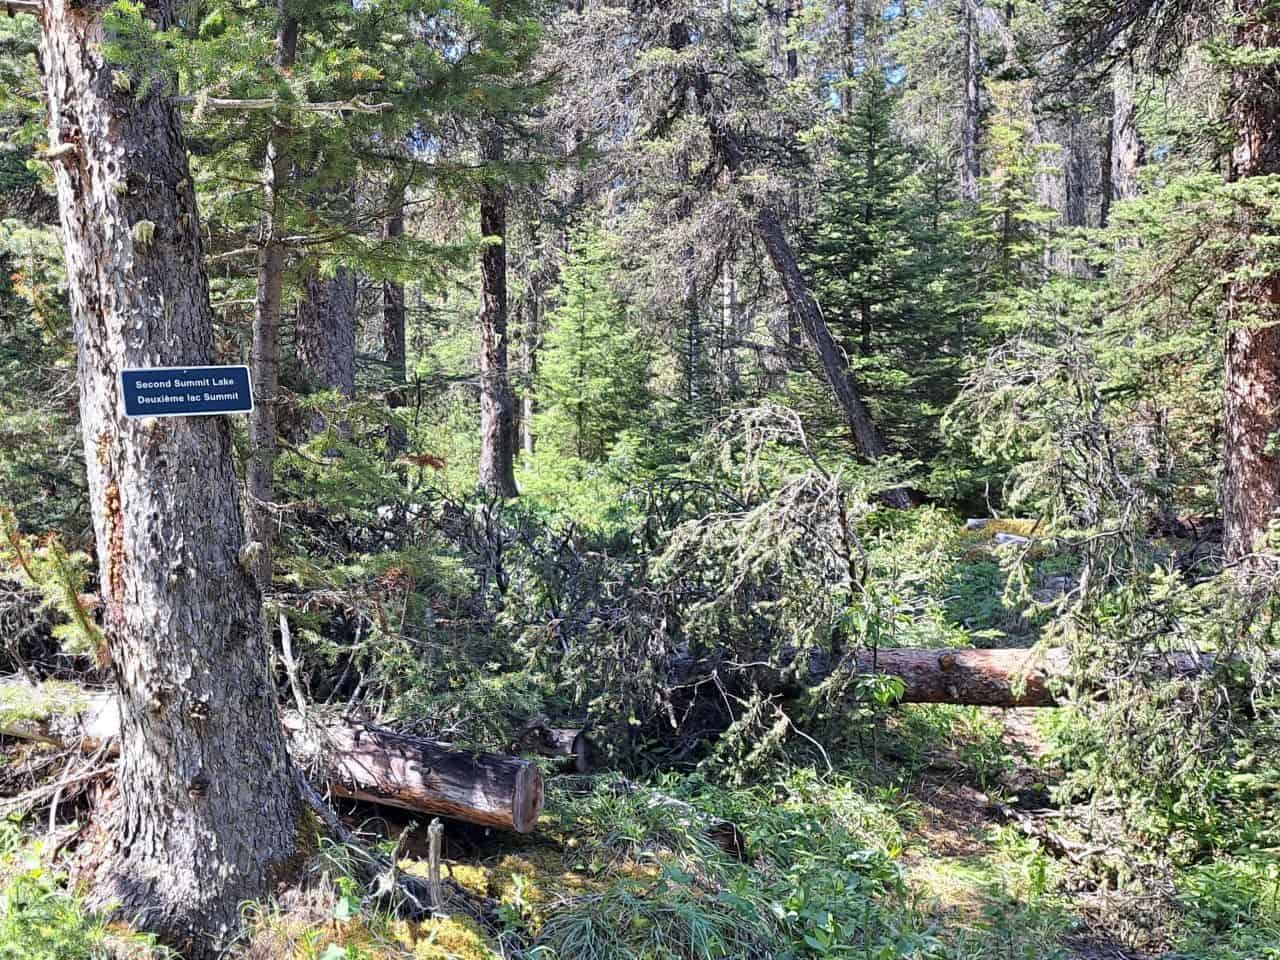 Many trees have fallen across the trail to Second Summit Lake on the Jacques Lake trail